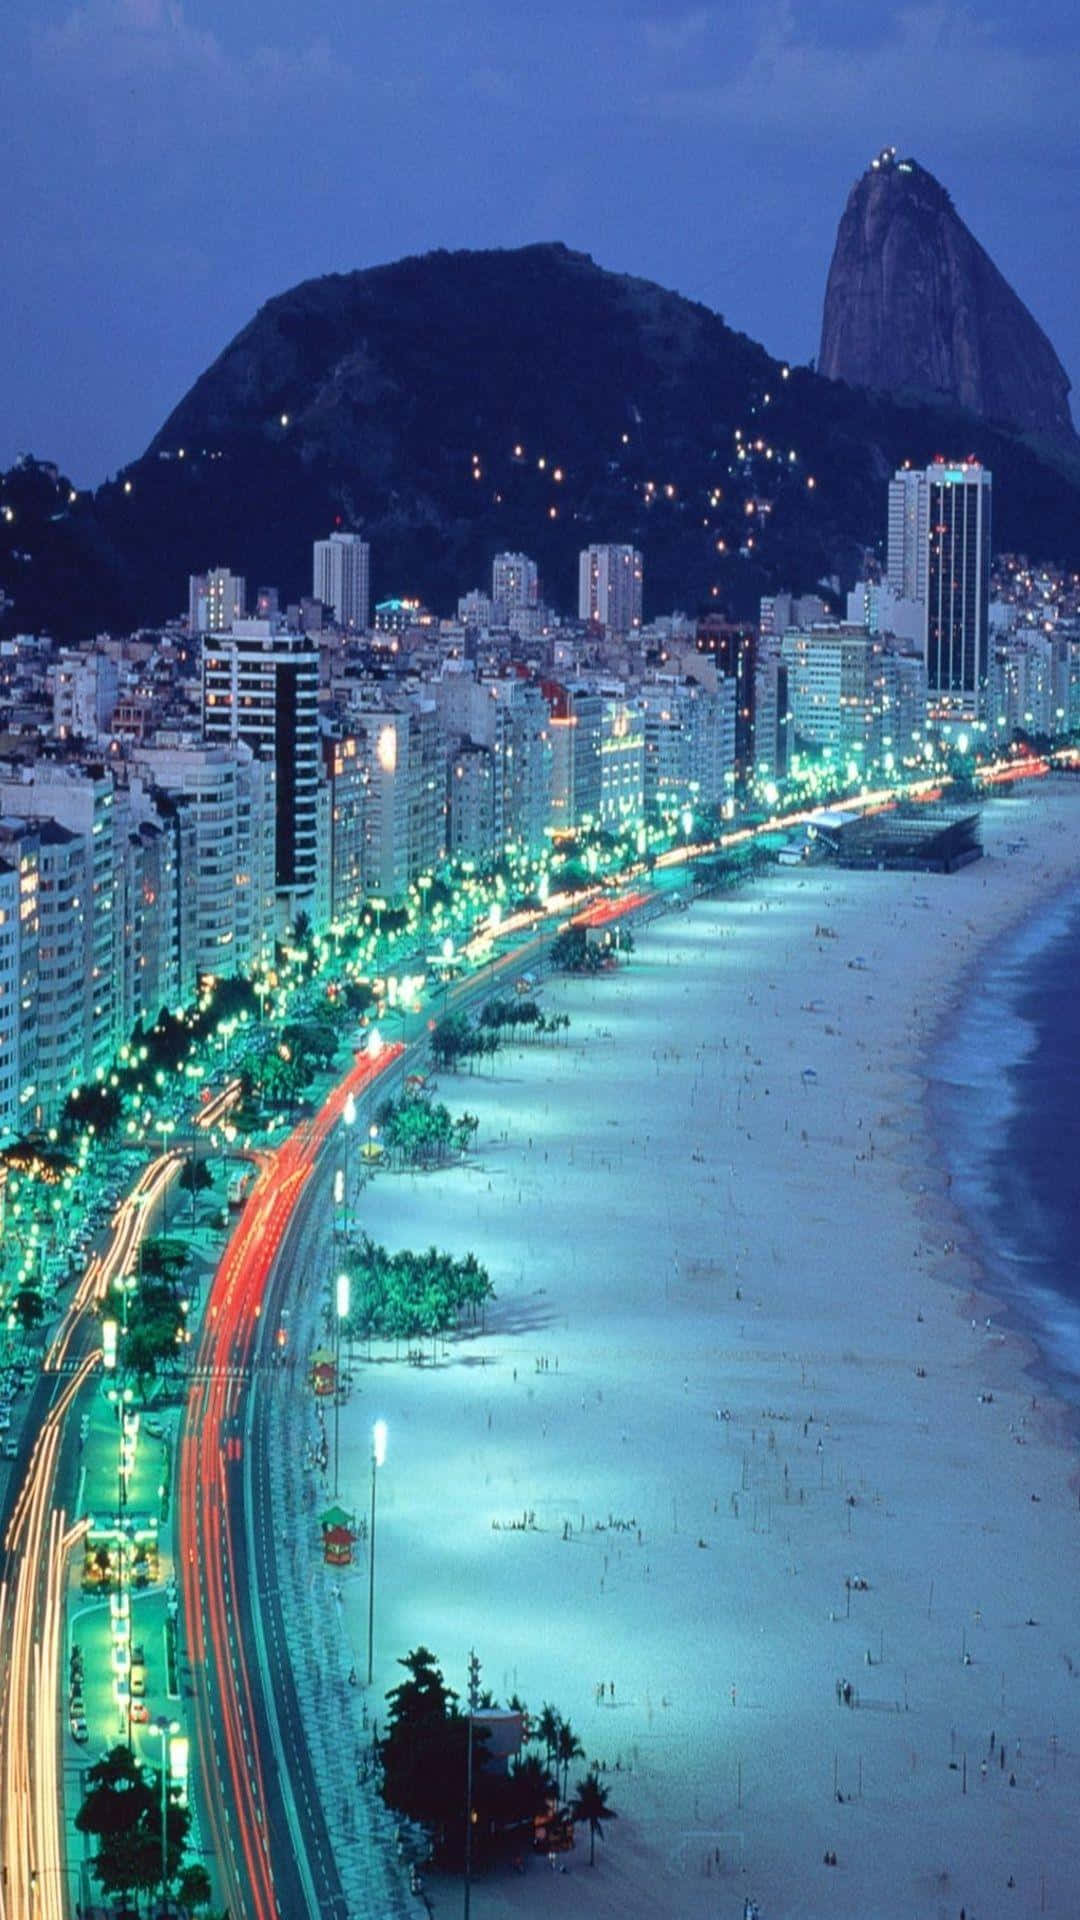 A City At Night With A Beach And Mountains